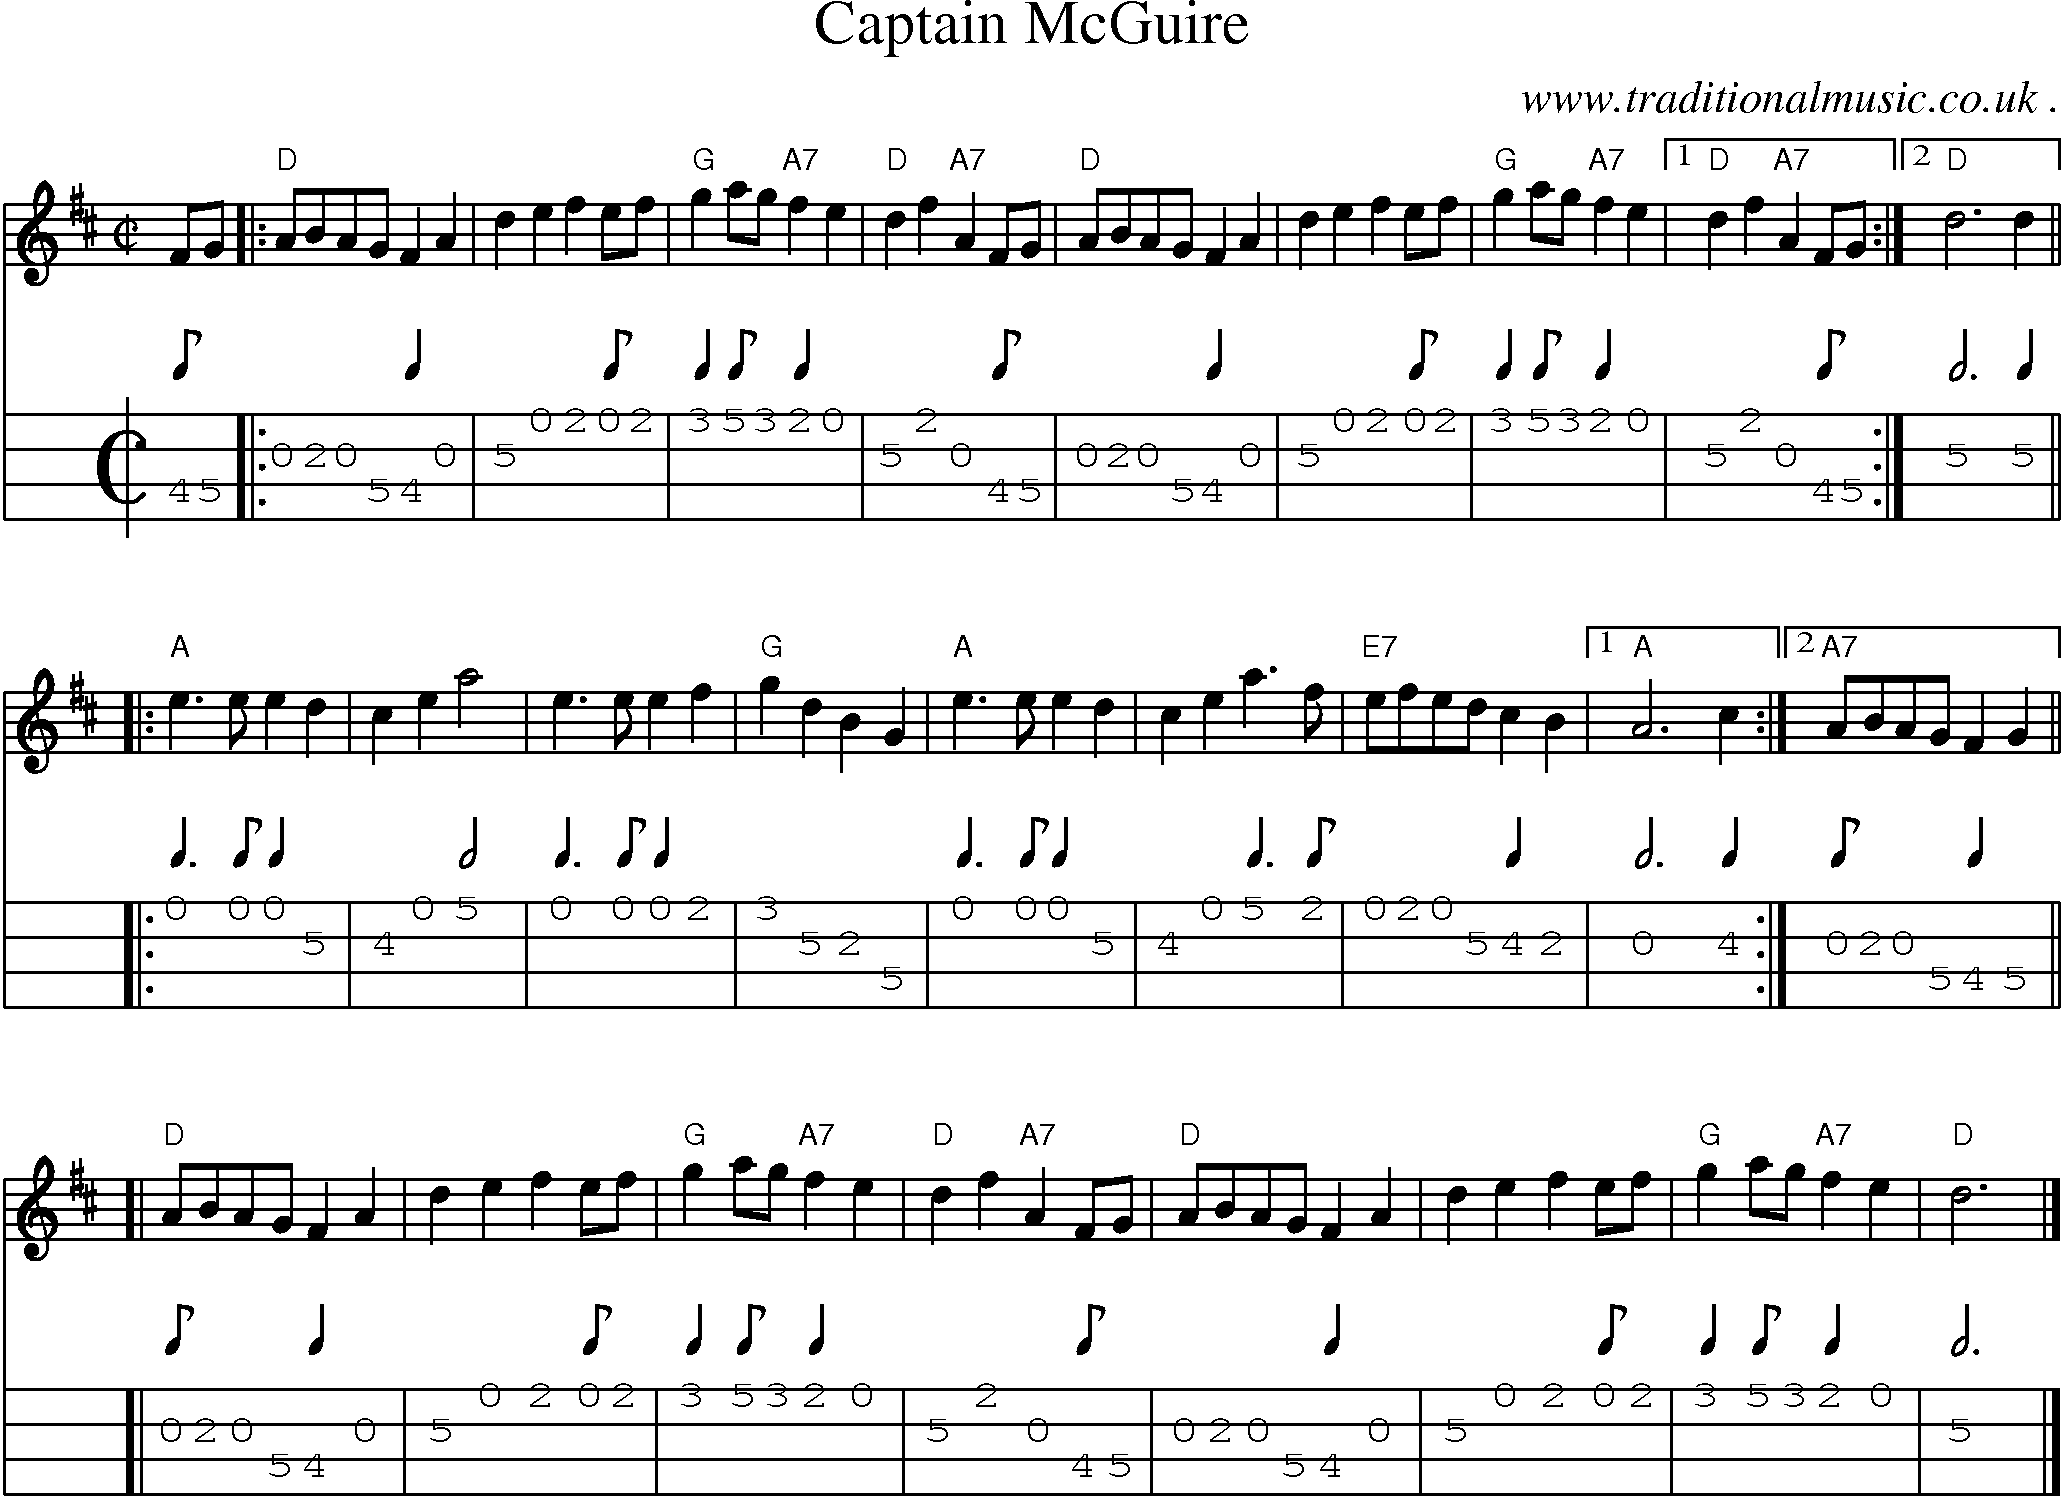 Sheet-music  score, Chords and Mandolin Tabs for Captain Mcguire